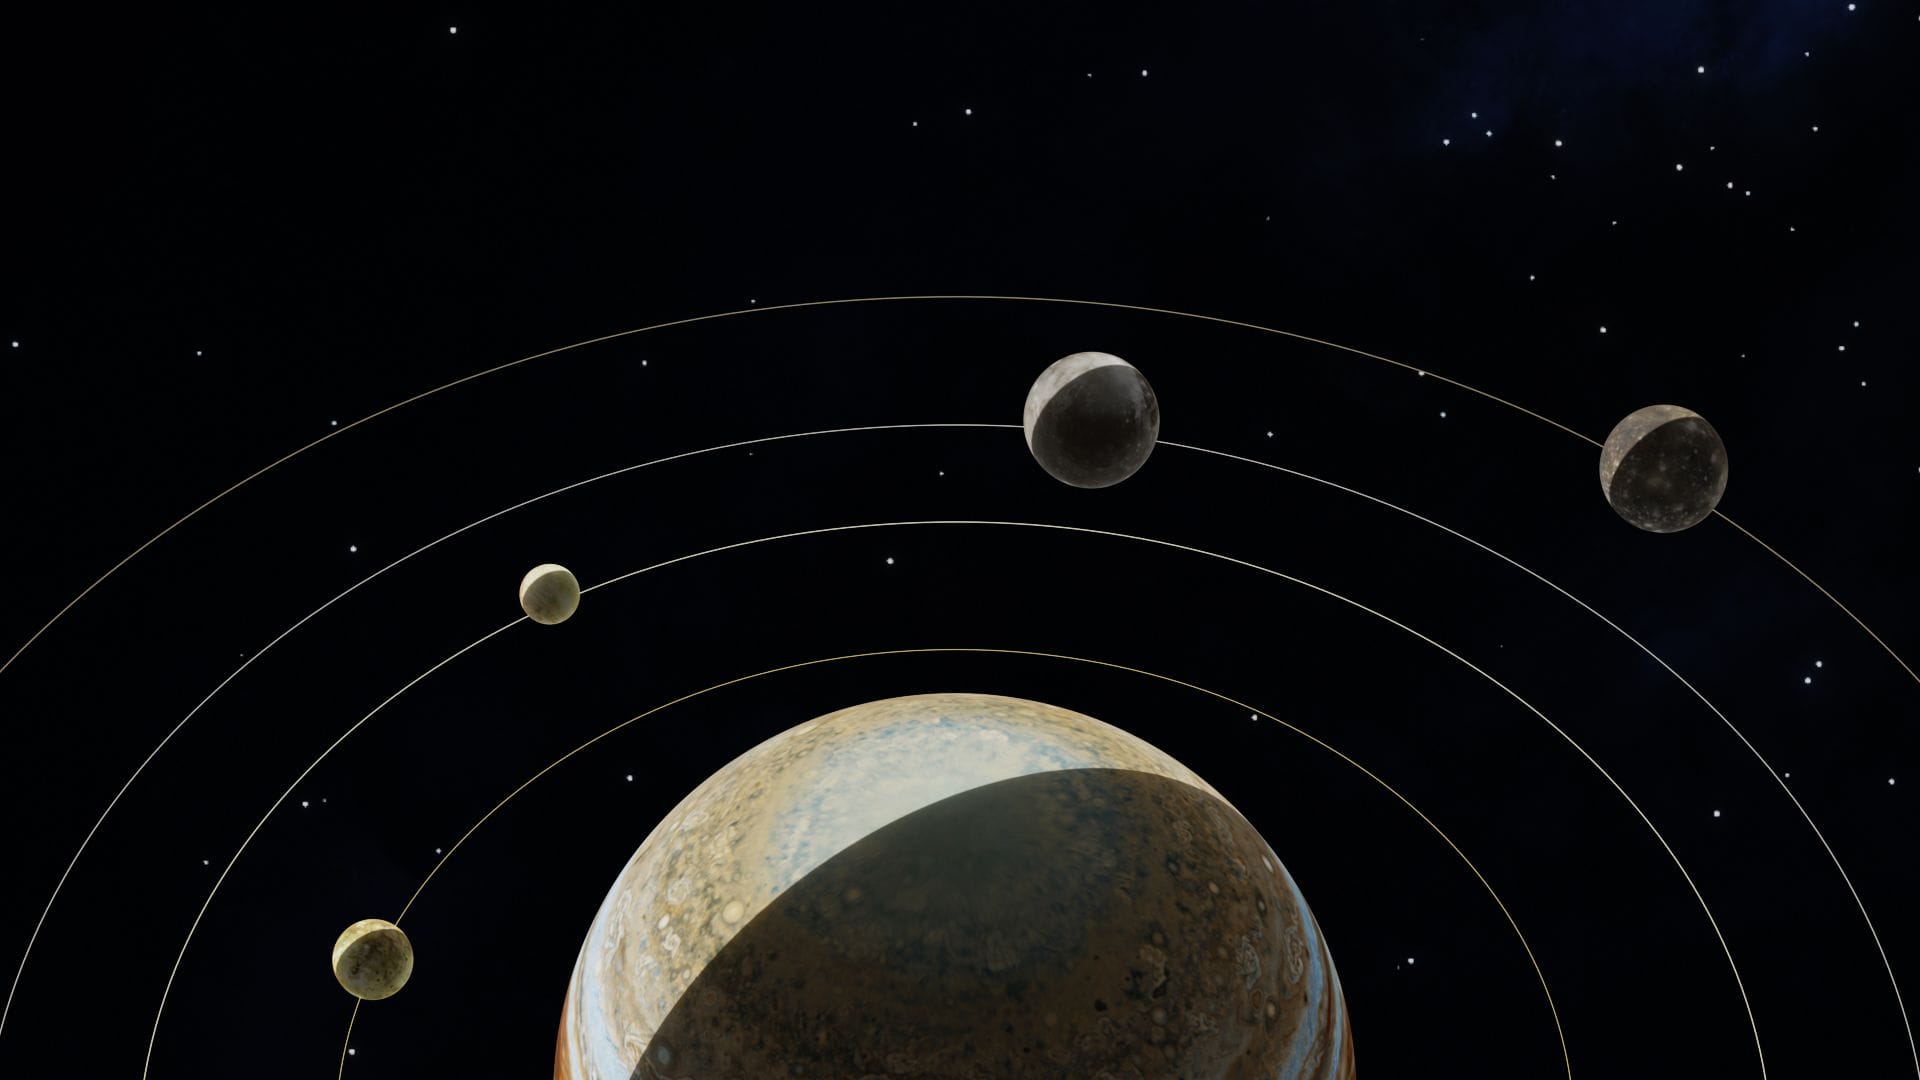 Galilean Moons: The Four Largest Moons Of Jupiter